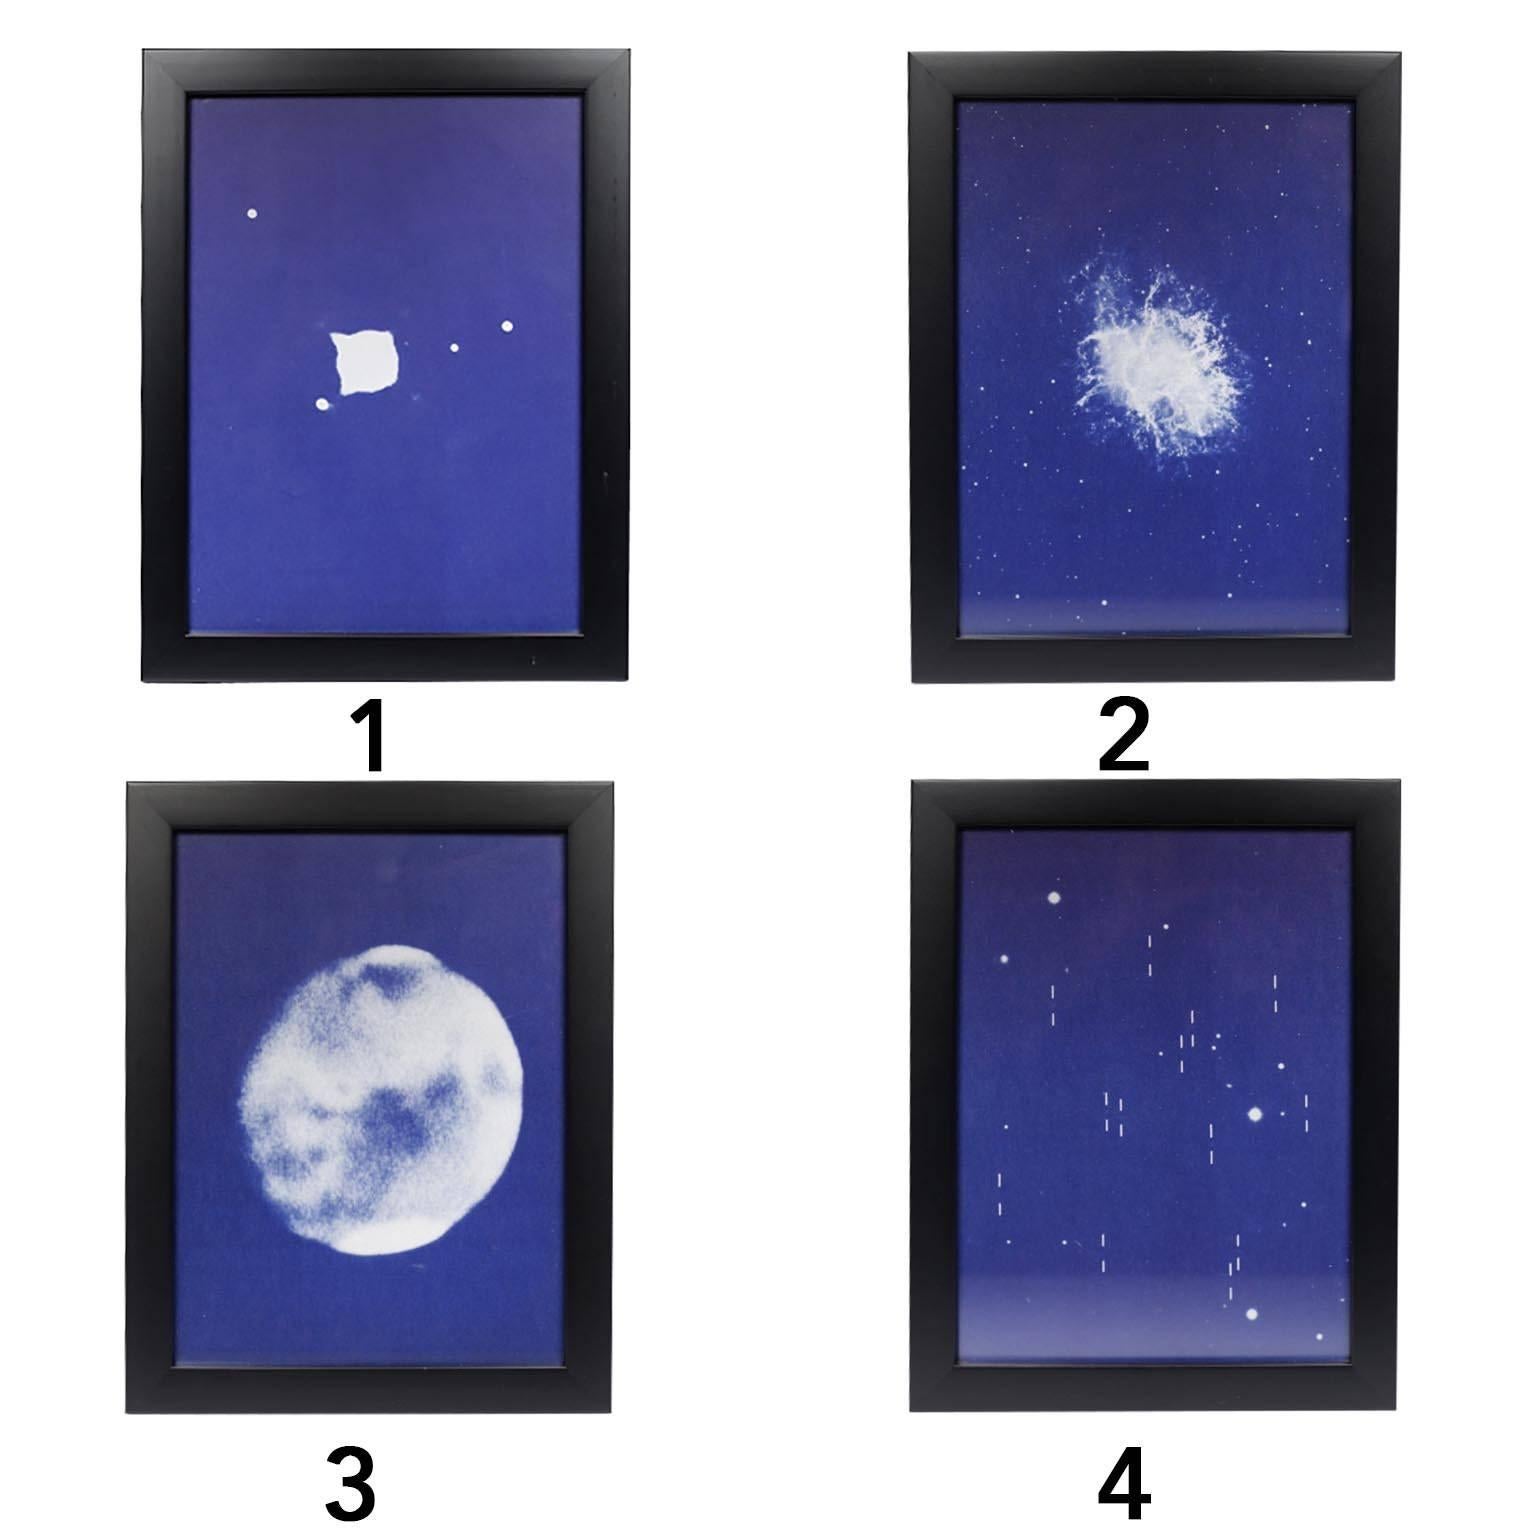 Collection of 16 astronomical images from the Hayden Planetarium, circa 1950s. The images are from a book from the Hayden Planetarium in New York City. 
Each image is unique and newly framed. Four are not shown. 
Five of the frames have slight